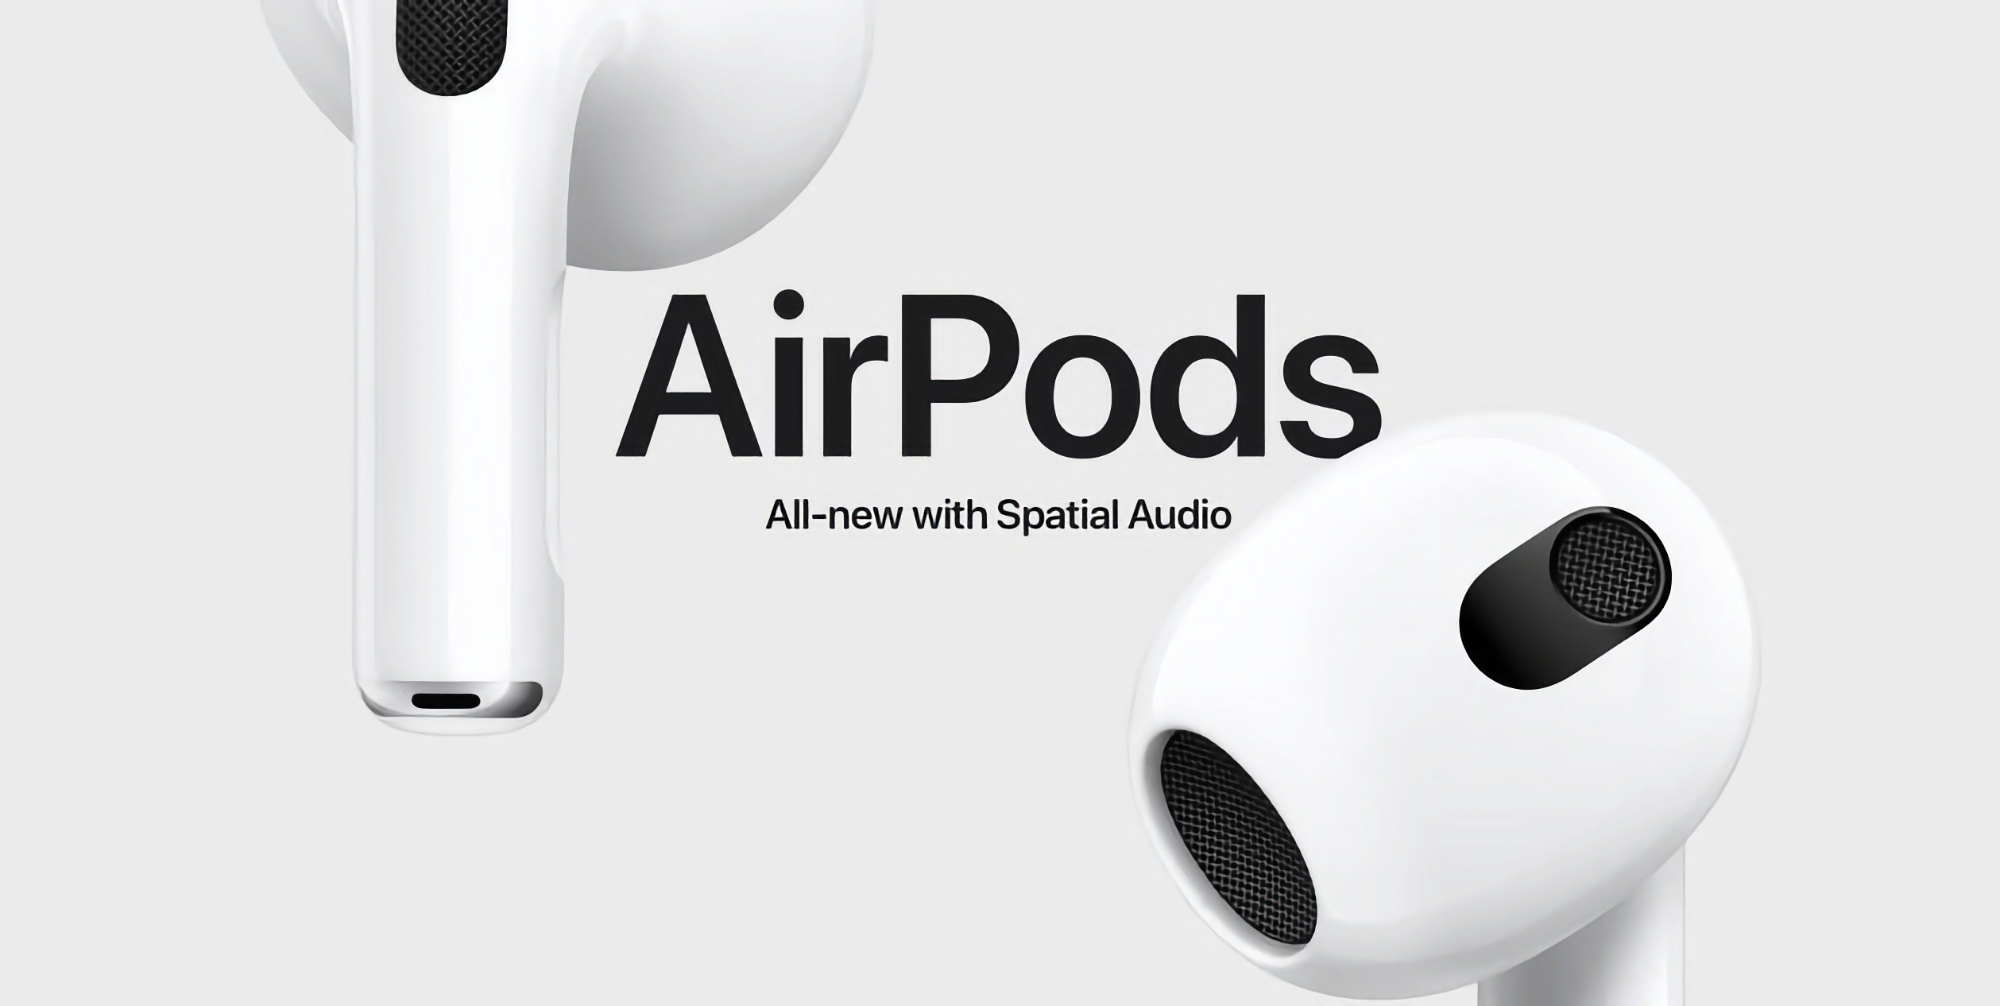 AirPods 3 with Dolby Atmos, Spatial Audio and up to 30 hours of battery life, available at Amazon for $20 off